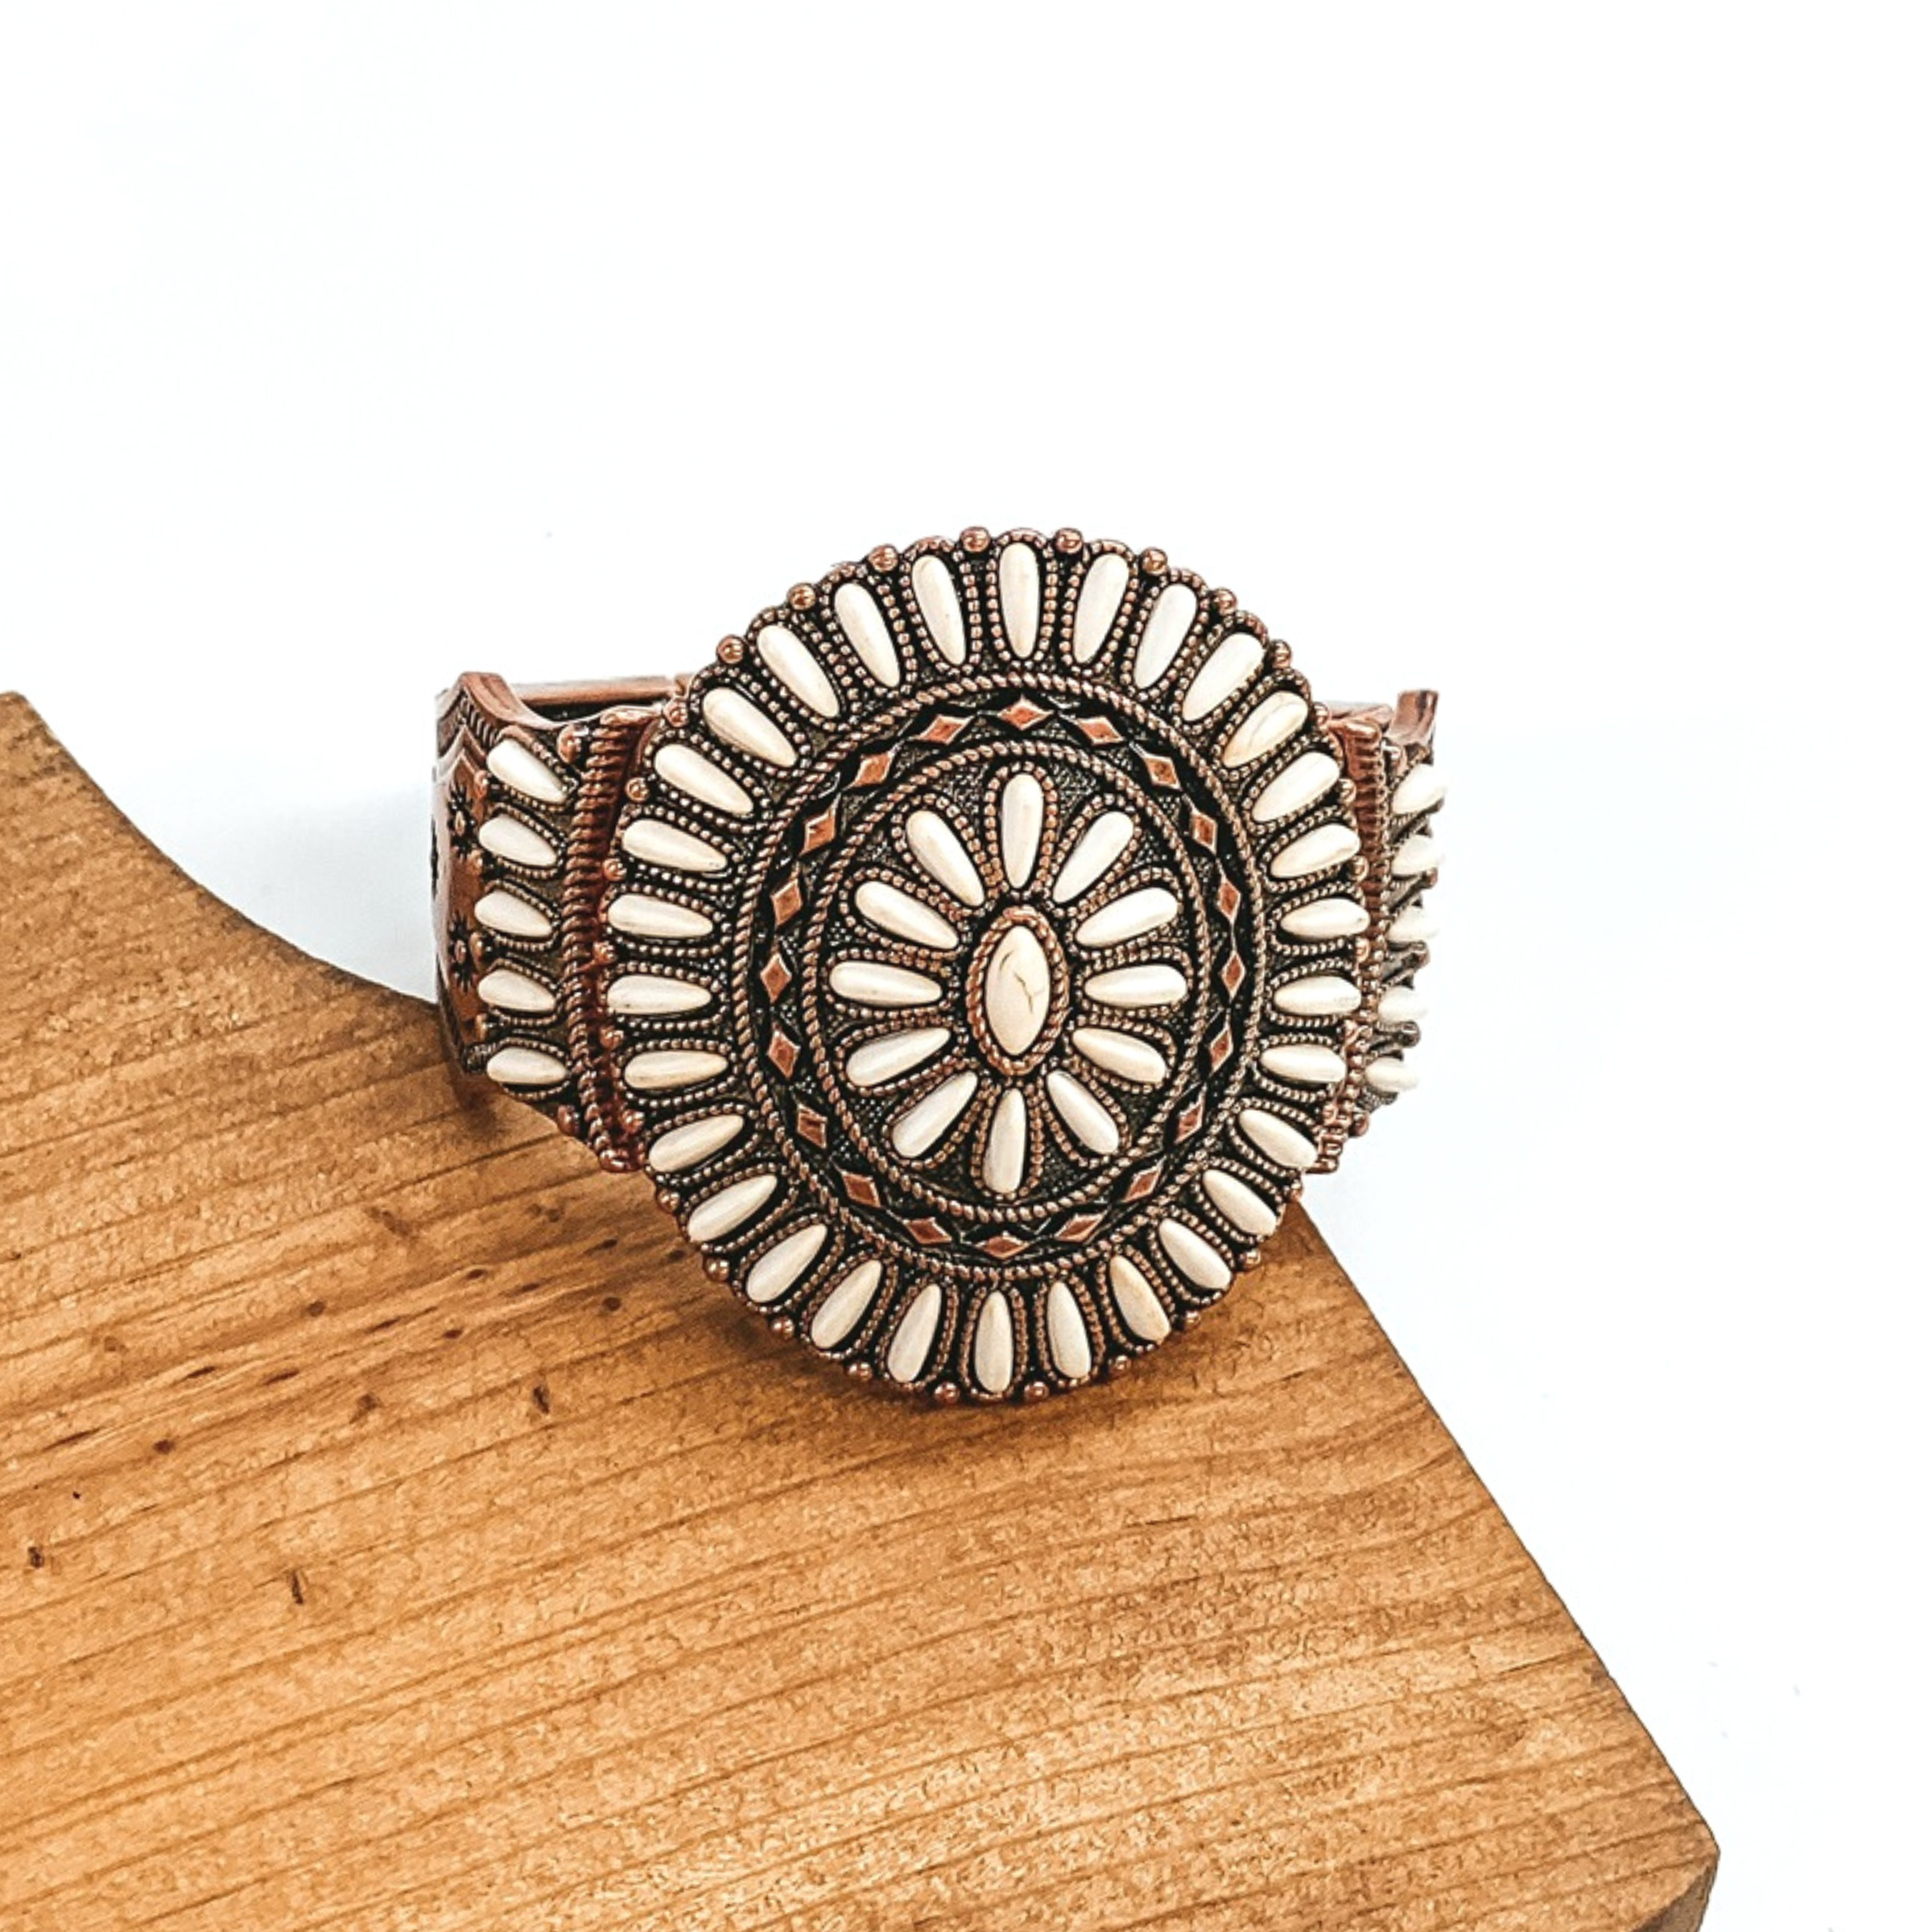 Ivory Stone Cluster Bracelet with Tooled Metal in Copper Tone - Giddy Up Glamour Boutique